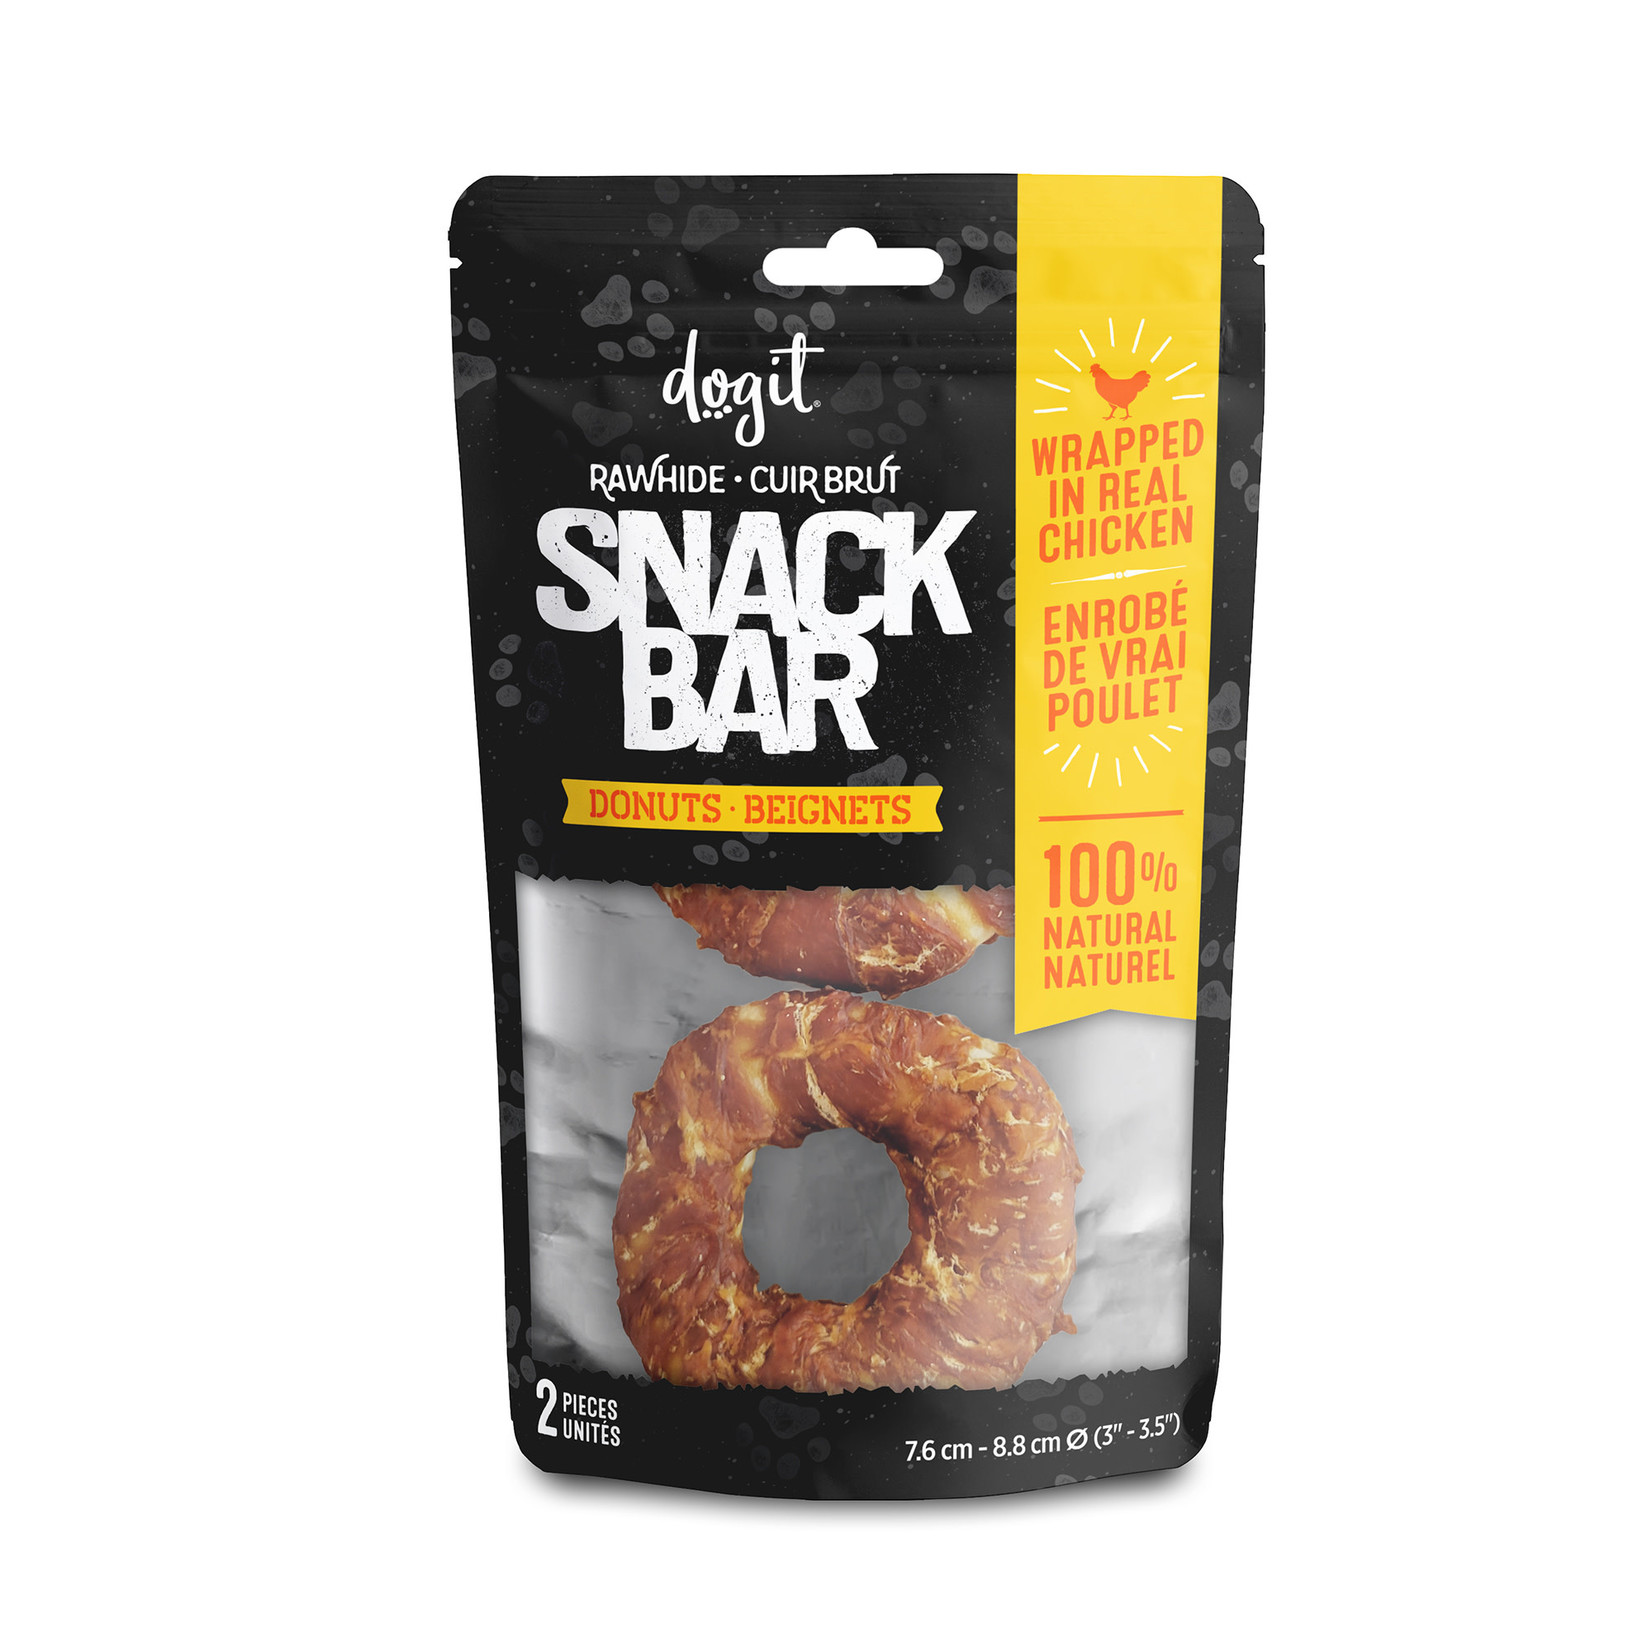 DOG IT Dogit Snack Bar Rawhide - Chicken-Wrapped Donuts - 2 pcs (7.6 - 8.8 cm/3 - 3.5 in dia.)